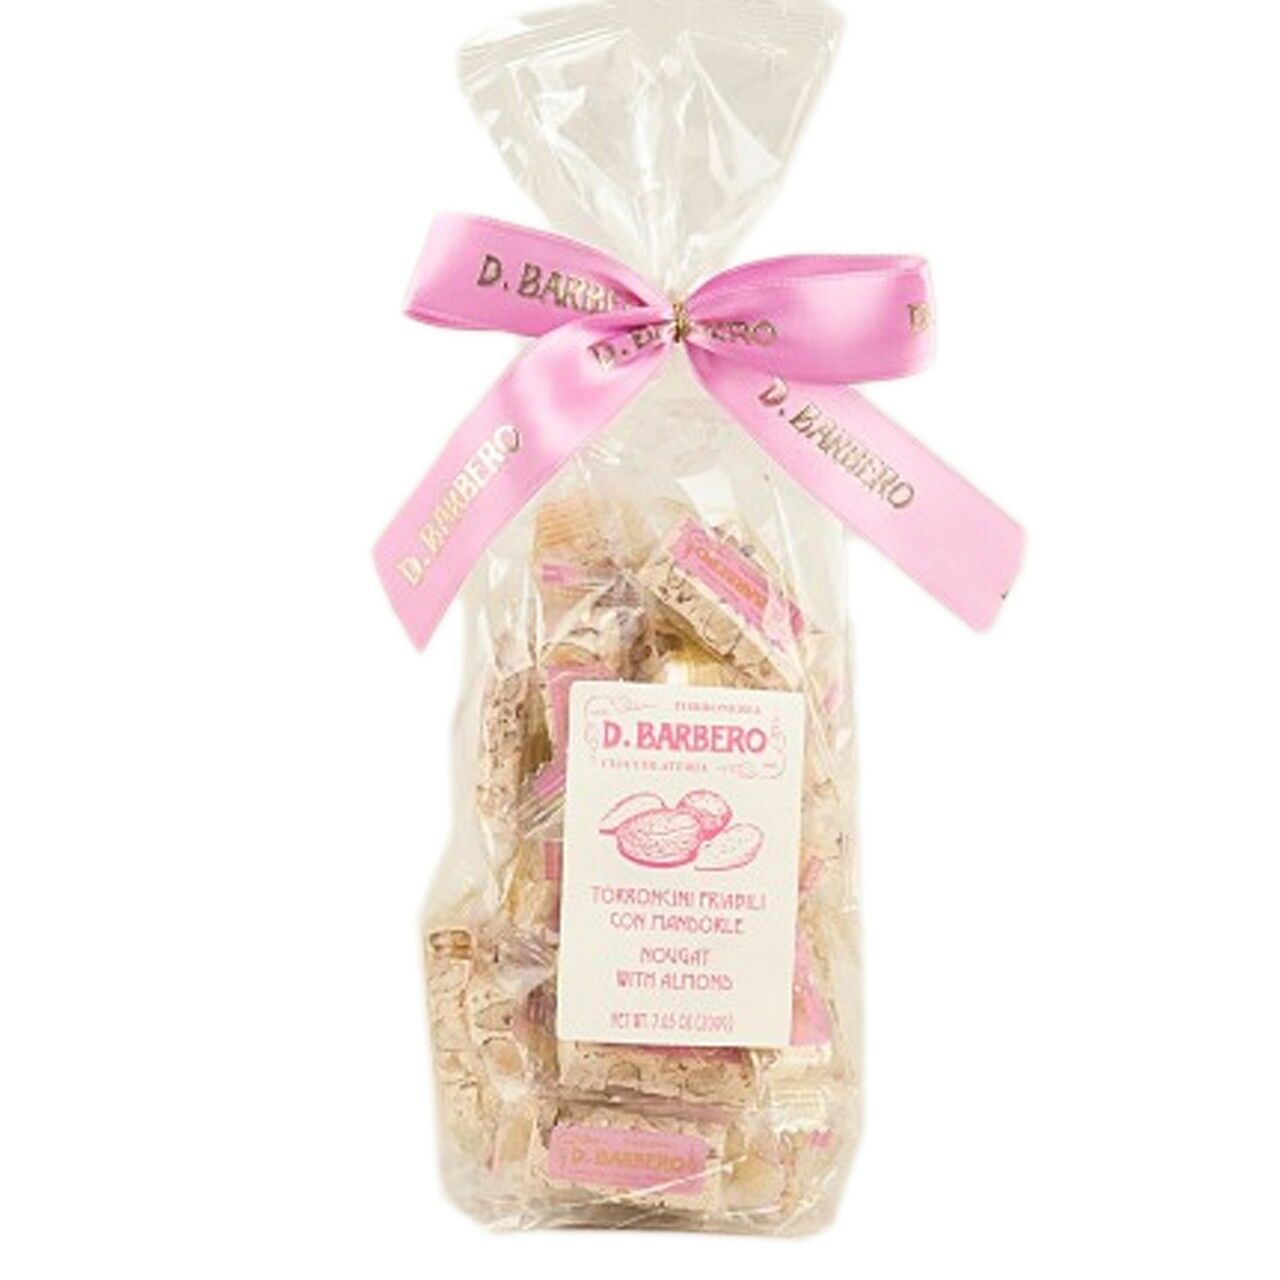 Nougat crumbly Almond